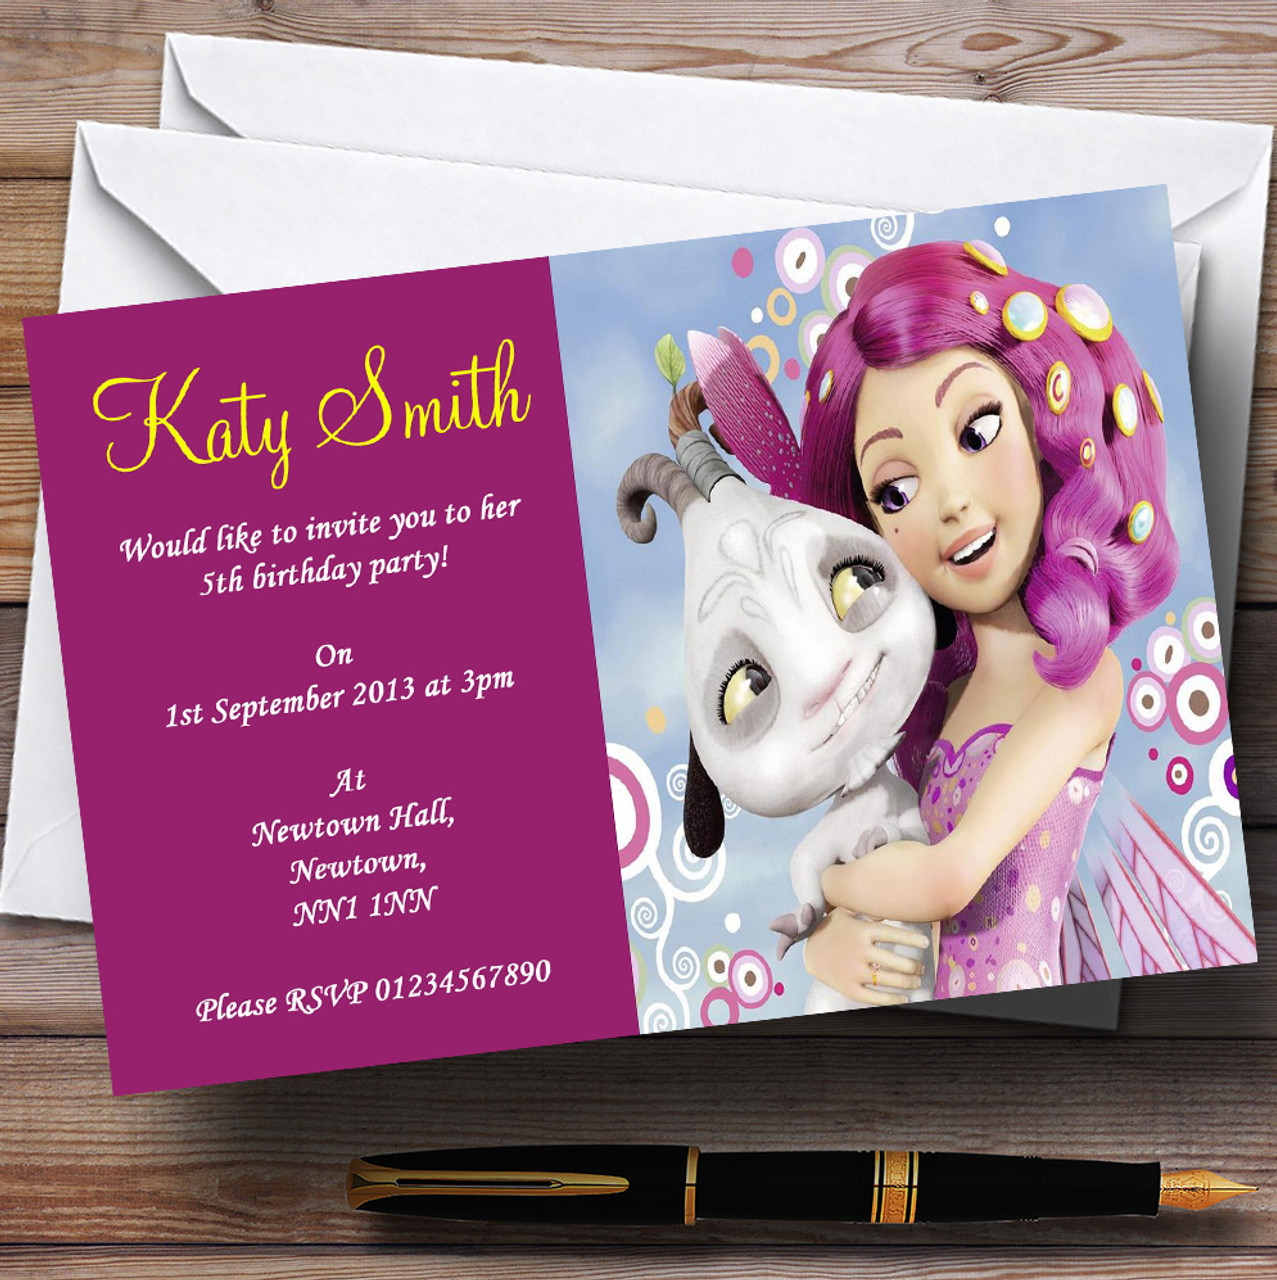 Mia And Me Personalized Children S Birthday Party Invitations Red Heart Print - roblox party invitations envelopes